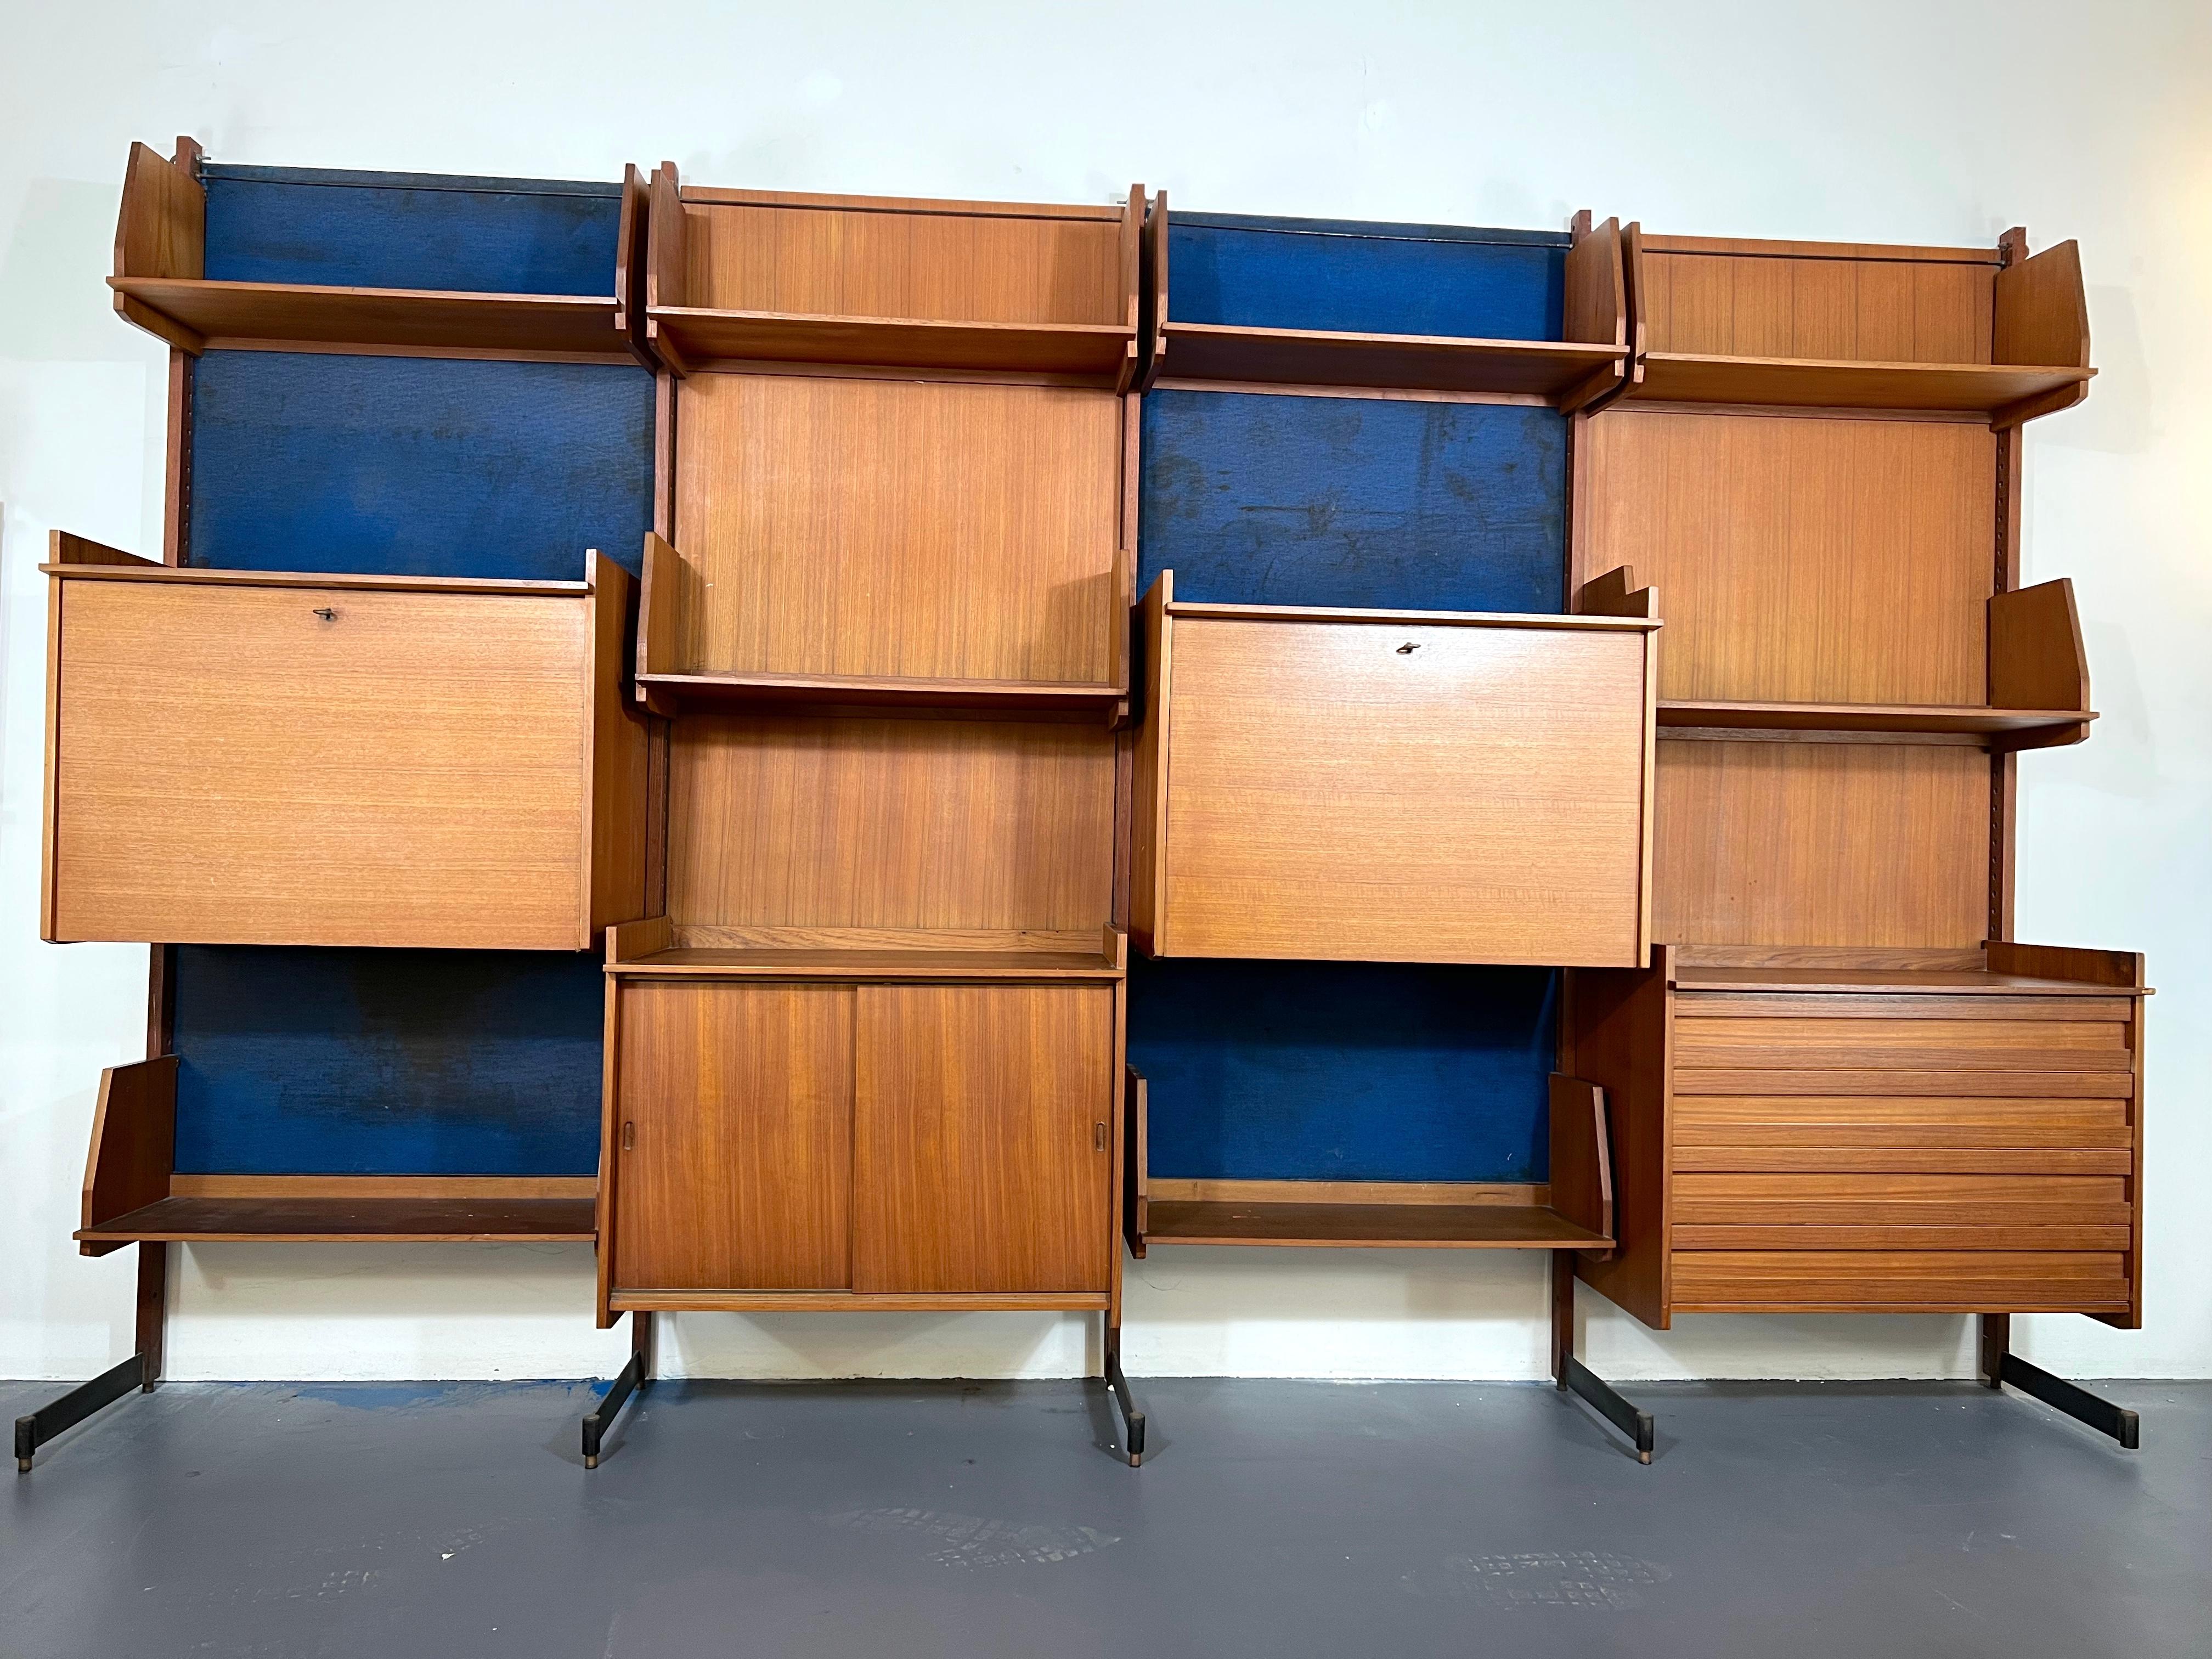 Good vintage condition with trace of age and use for this wall unit made from wood and metal with brass details. The blue velvet background is in poor condition. Produced in Italy during the 1950s.